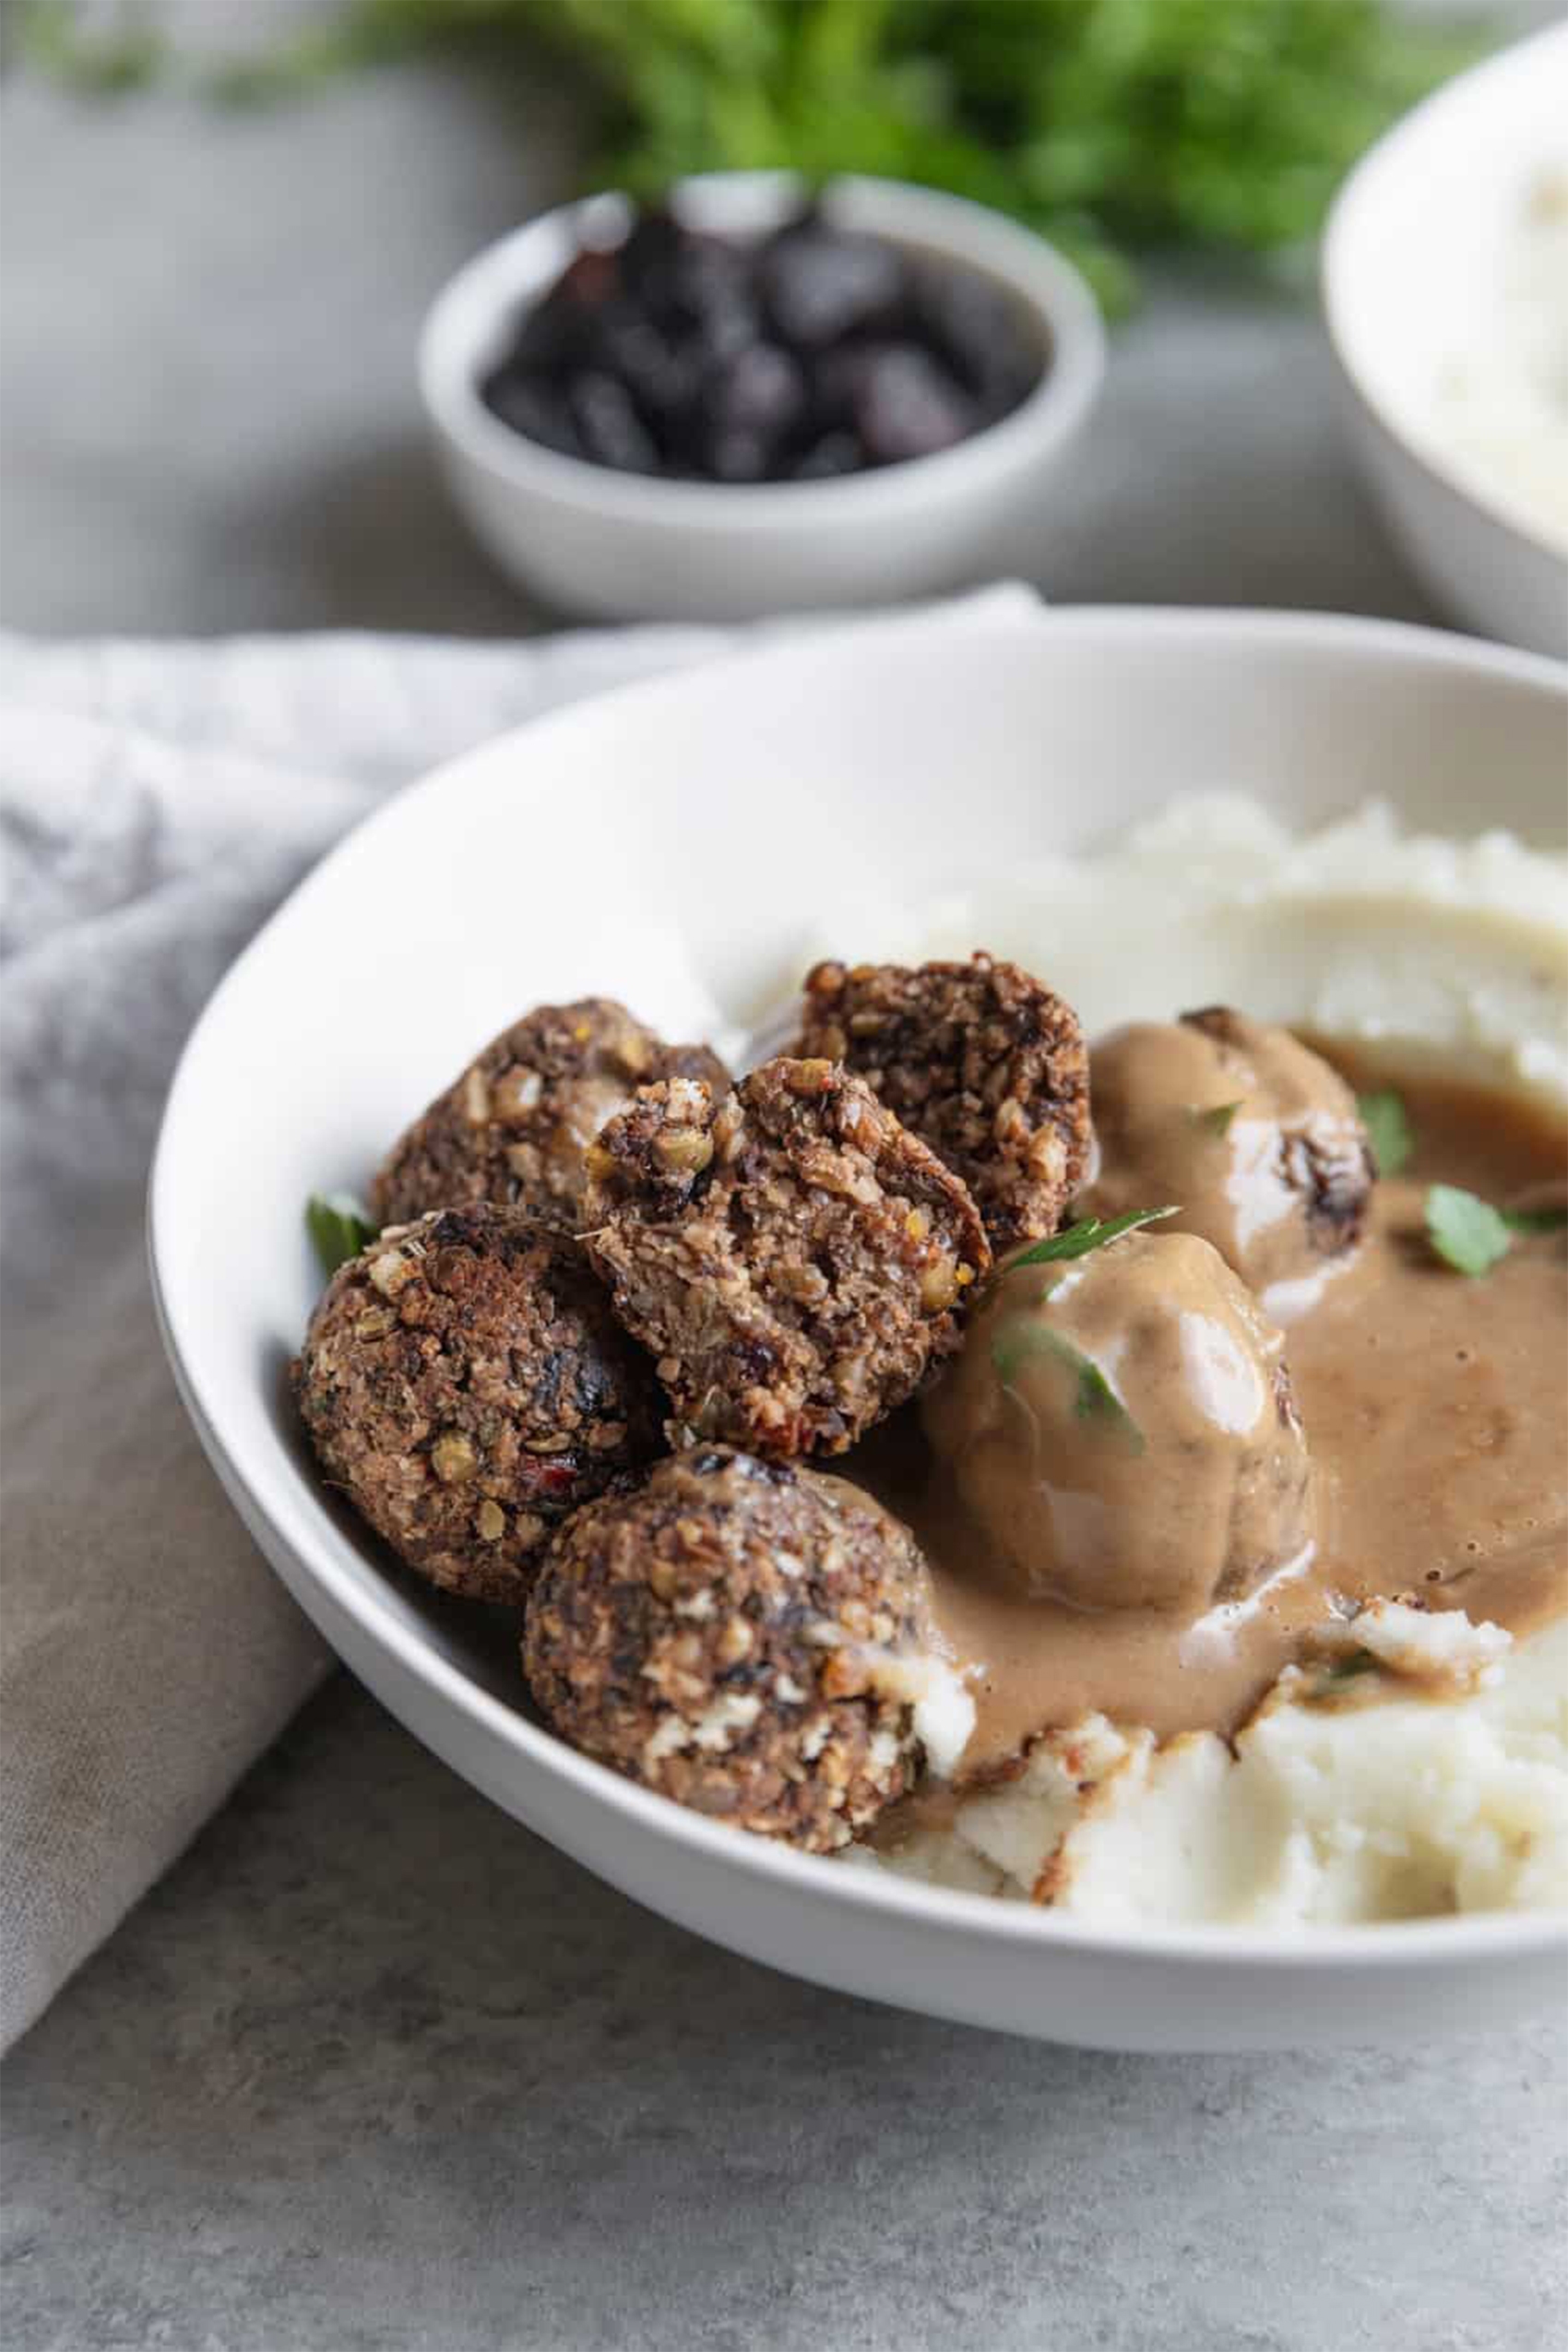 a bowl of mashed potatoes topped with gravy and served with vegan meatballs